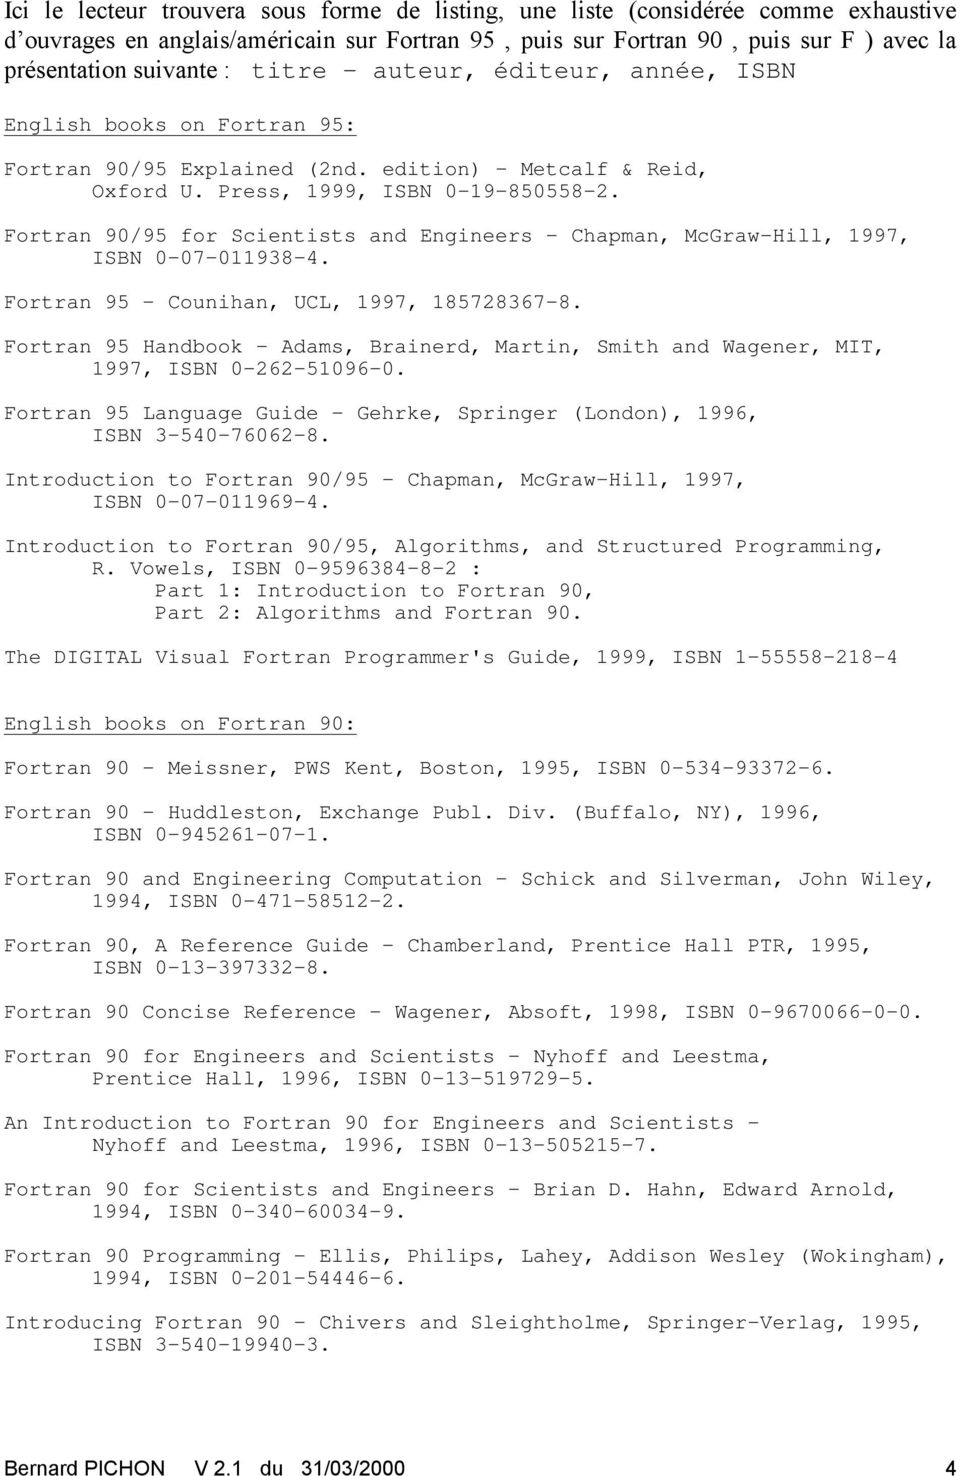 Fortran 90/95 for Scientists and Engineers - Chapman, McGraw-Hill, 1997, ISBN 0-07-011938-4. Fortran 95 - Counihan, UCL, 1997, 185728367-8.